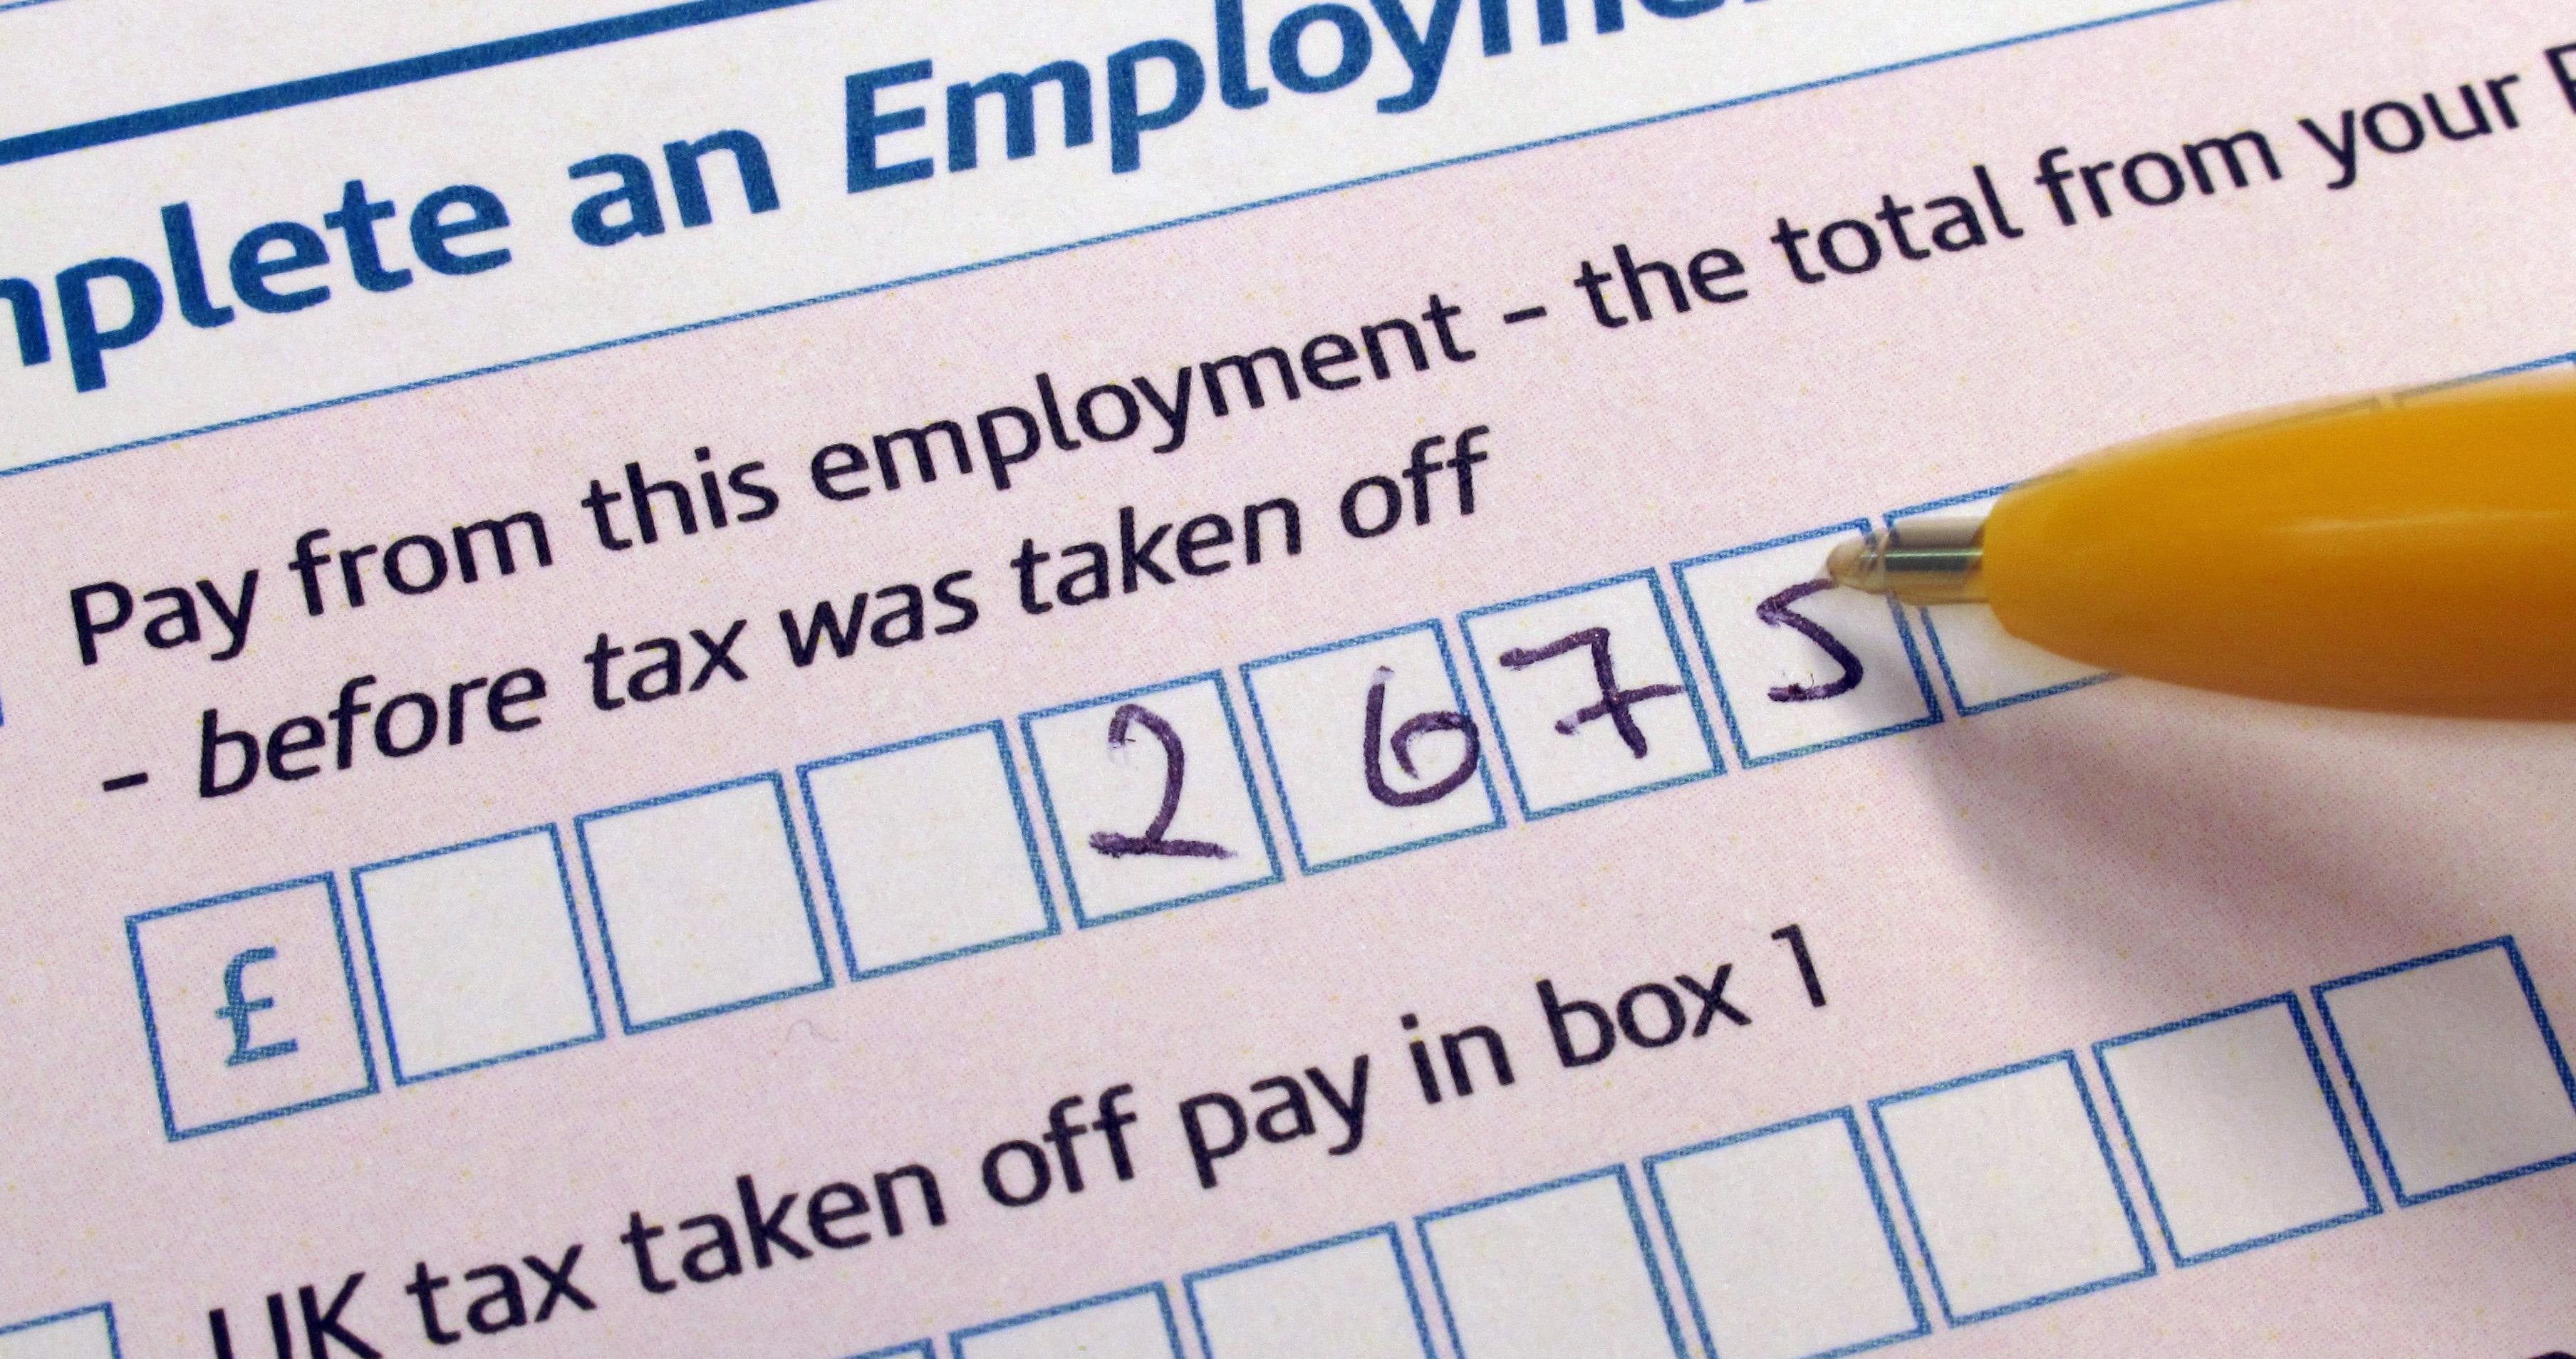 More than two million taxpayers still need to file their self-assessment returns by the end of February in order to avoid penalties (PA)